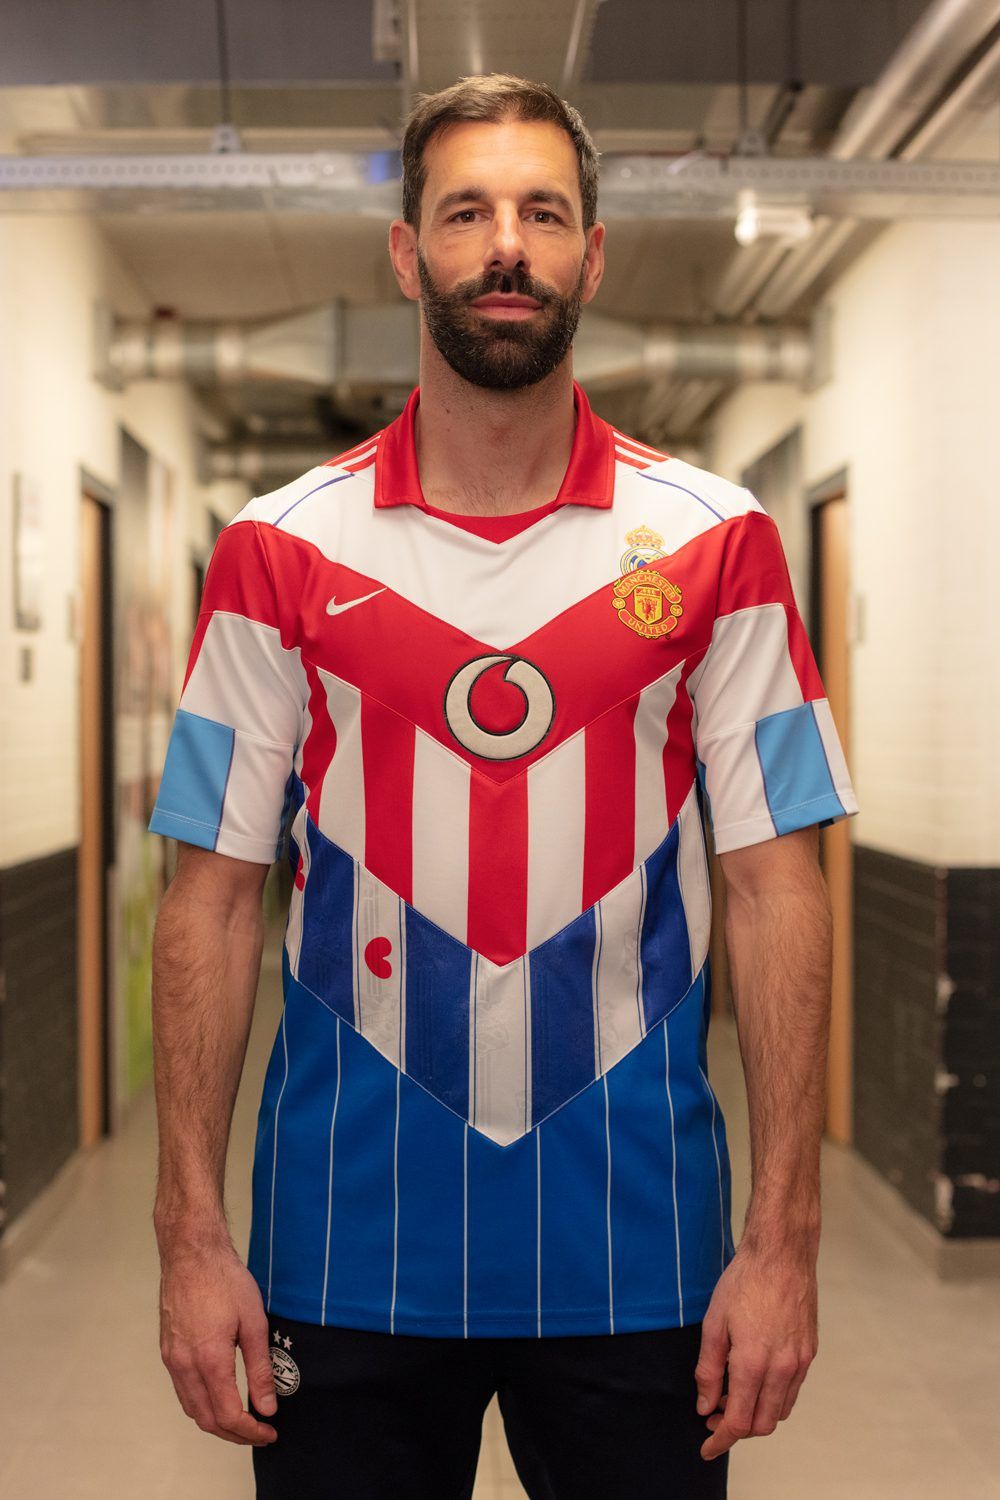 Van Nistelrooy Receives Spectacular Mashup Jersey Combining All His